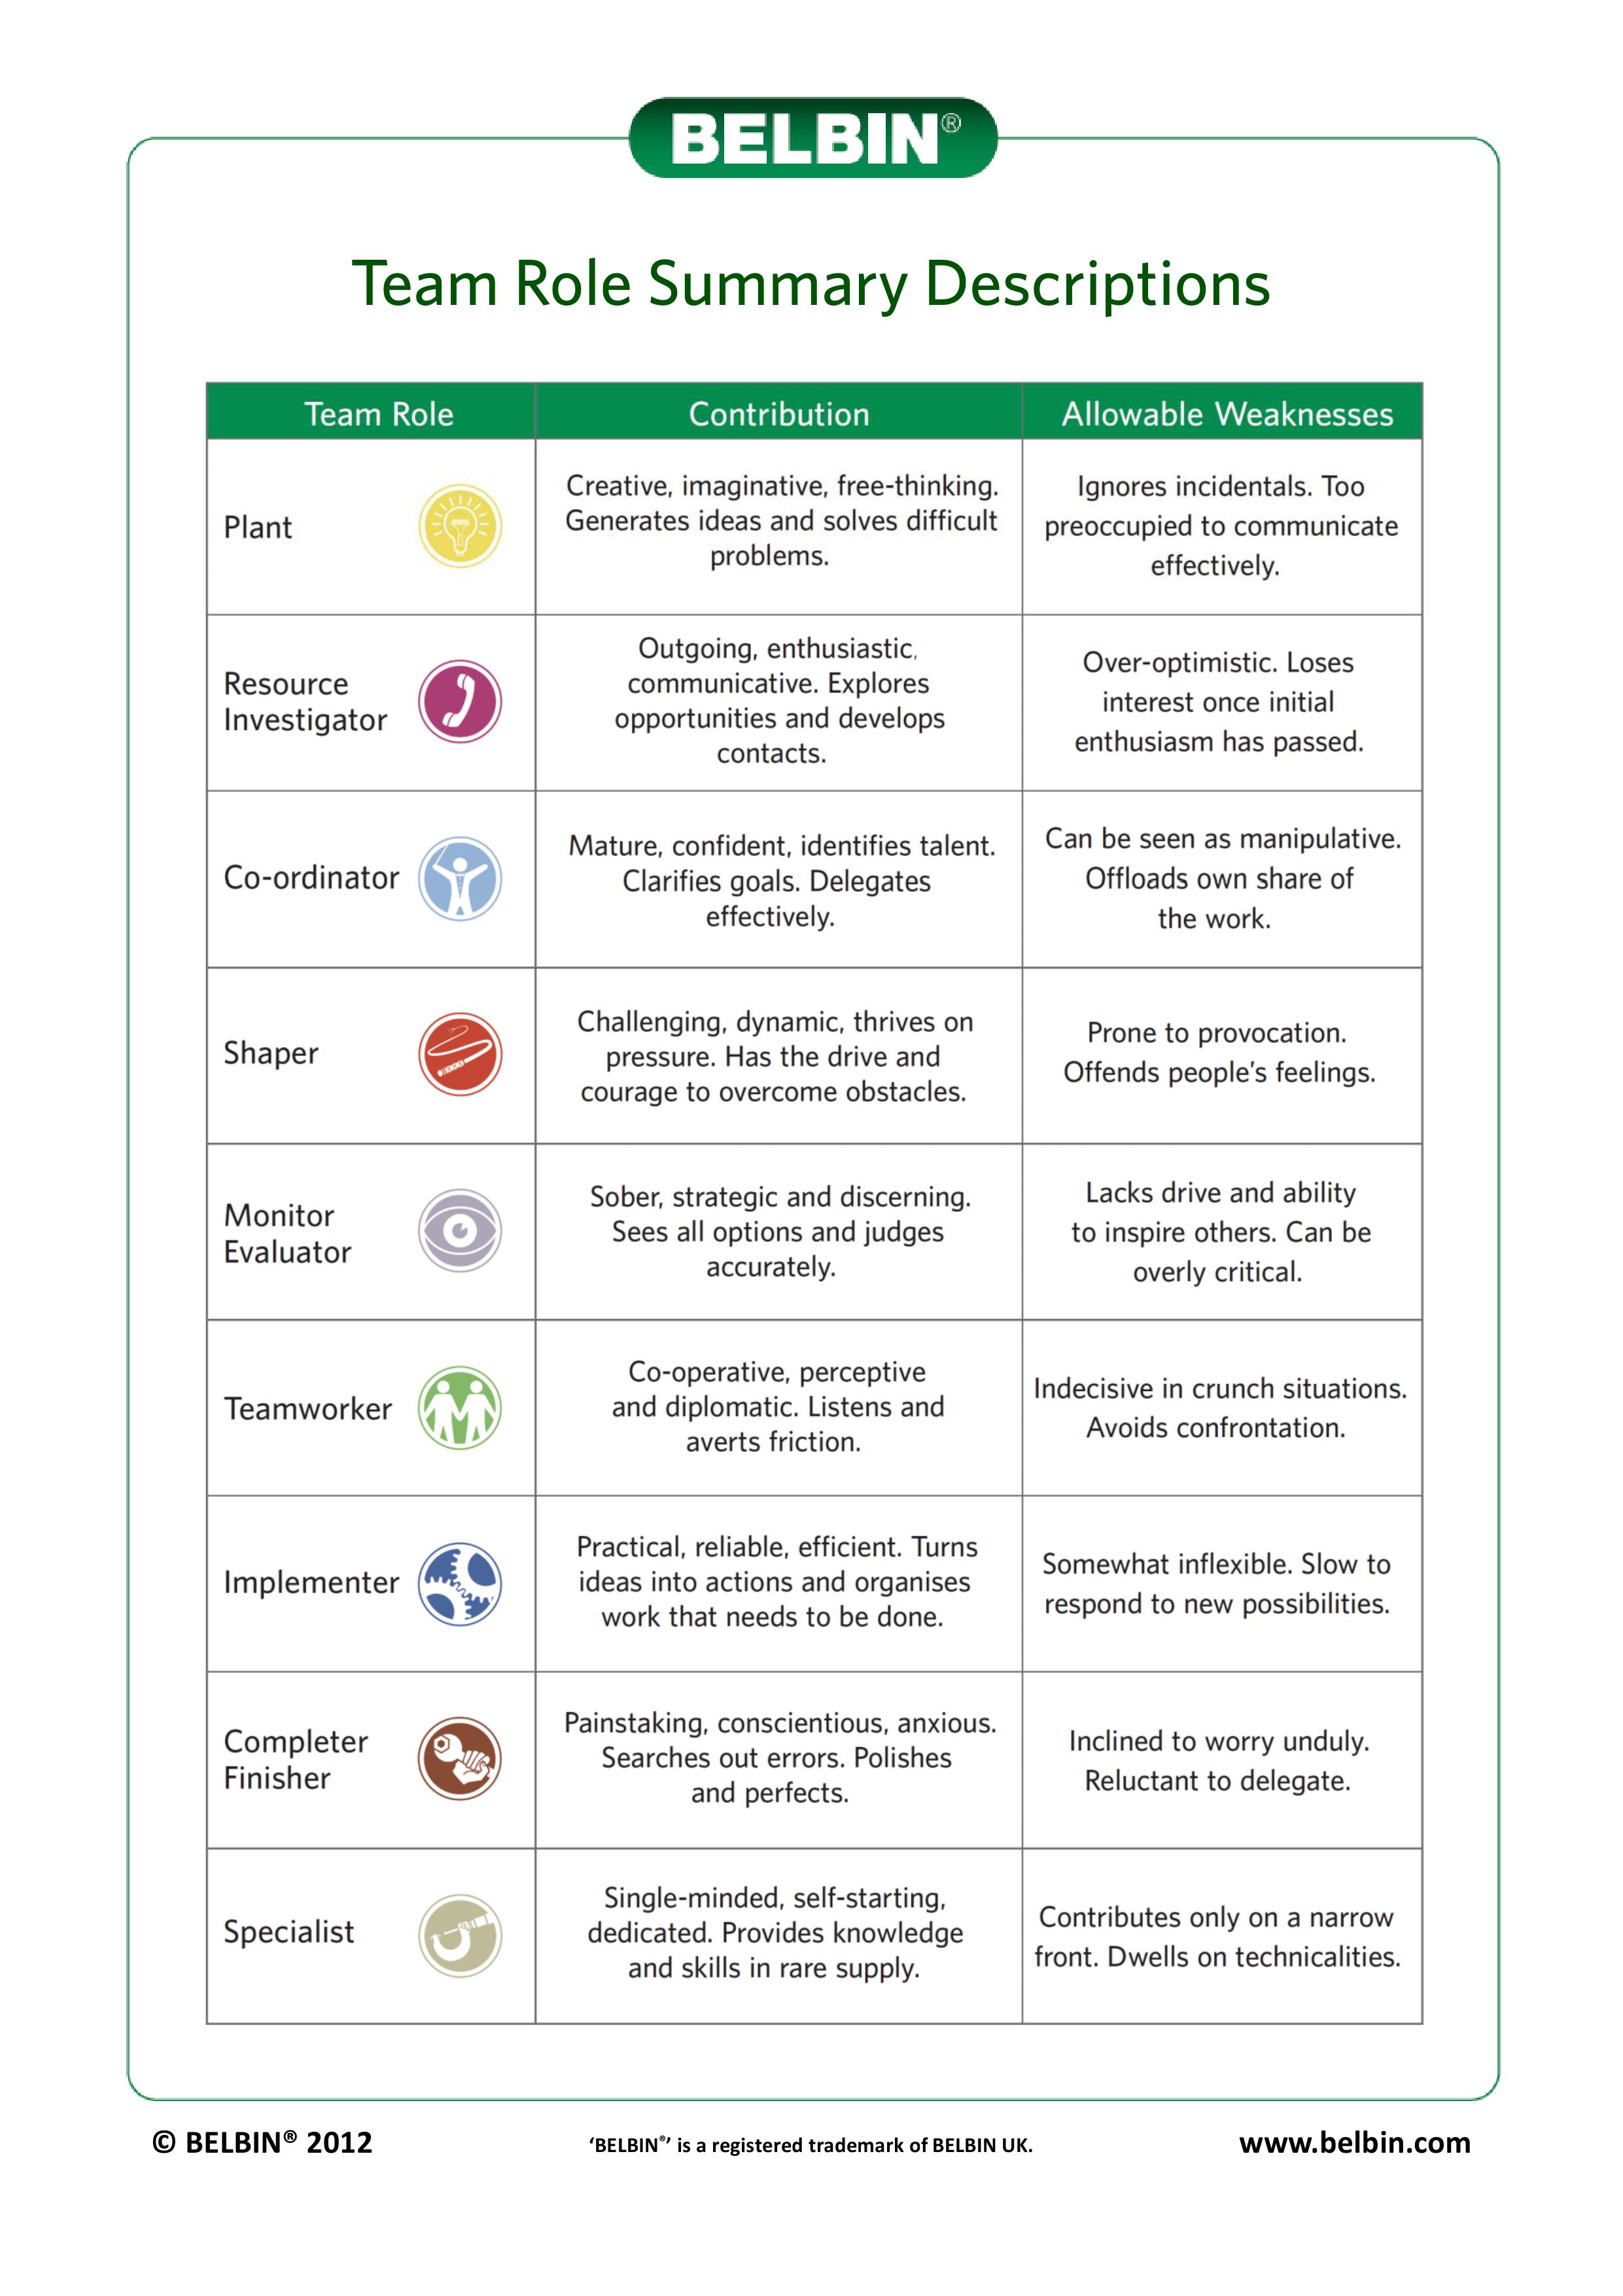 belbin team roles questionnaire free download